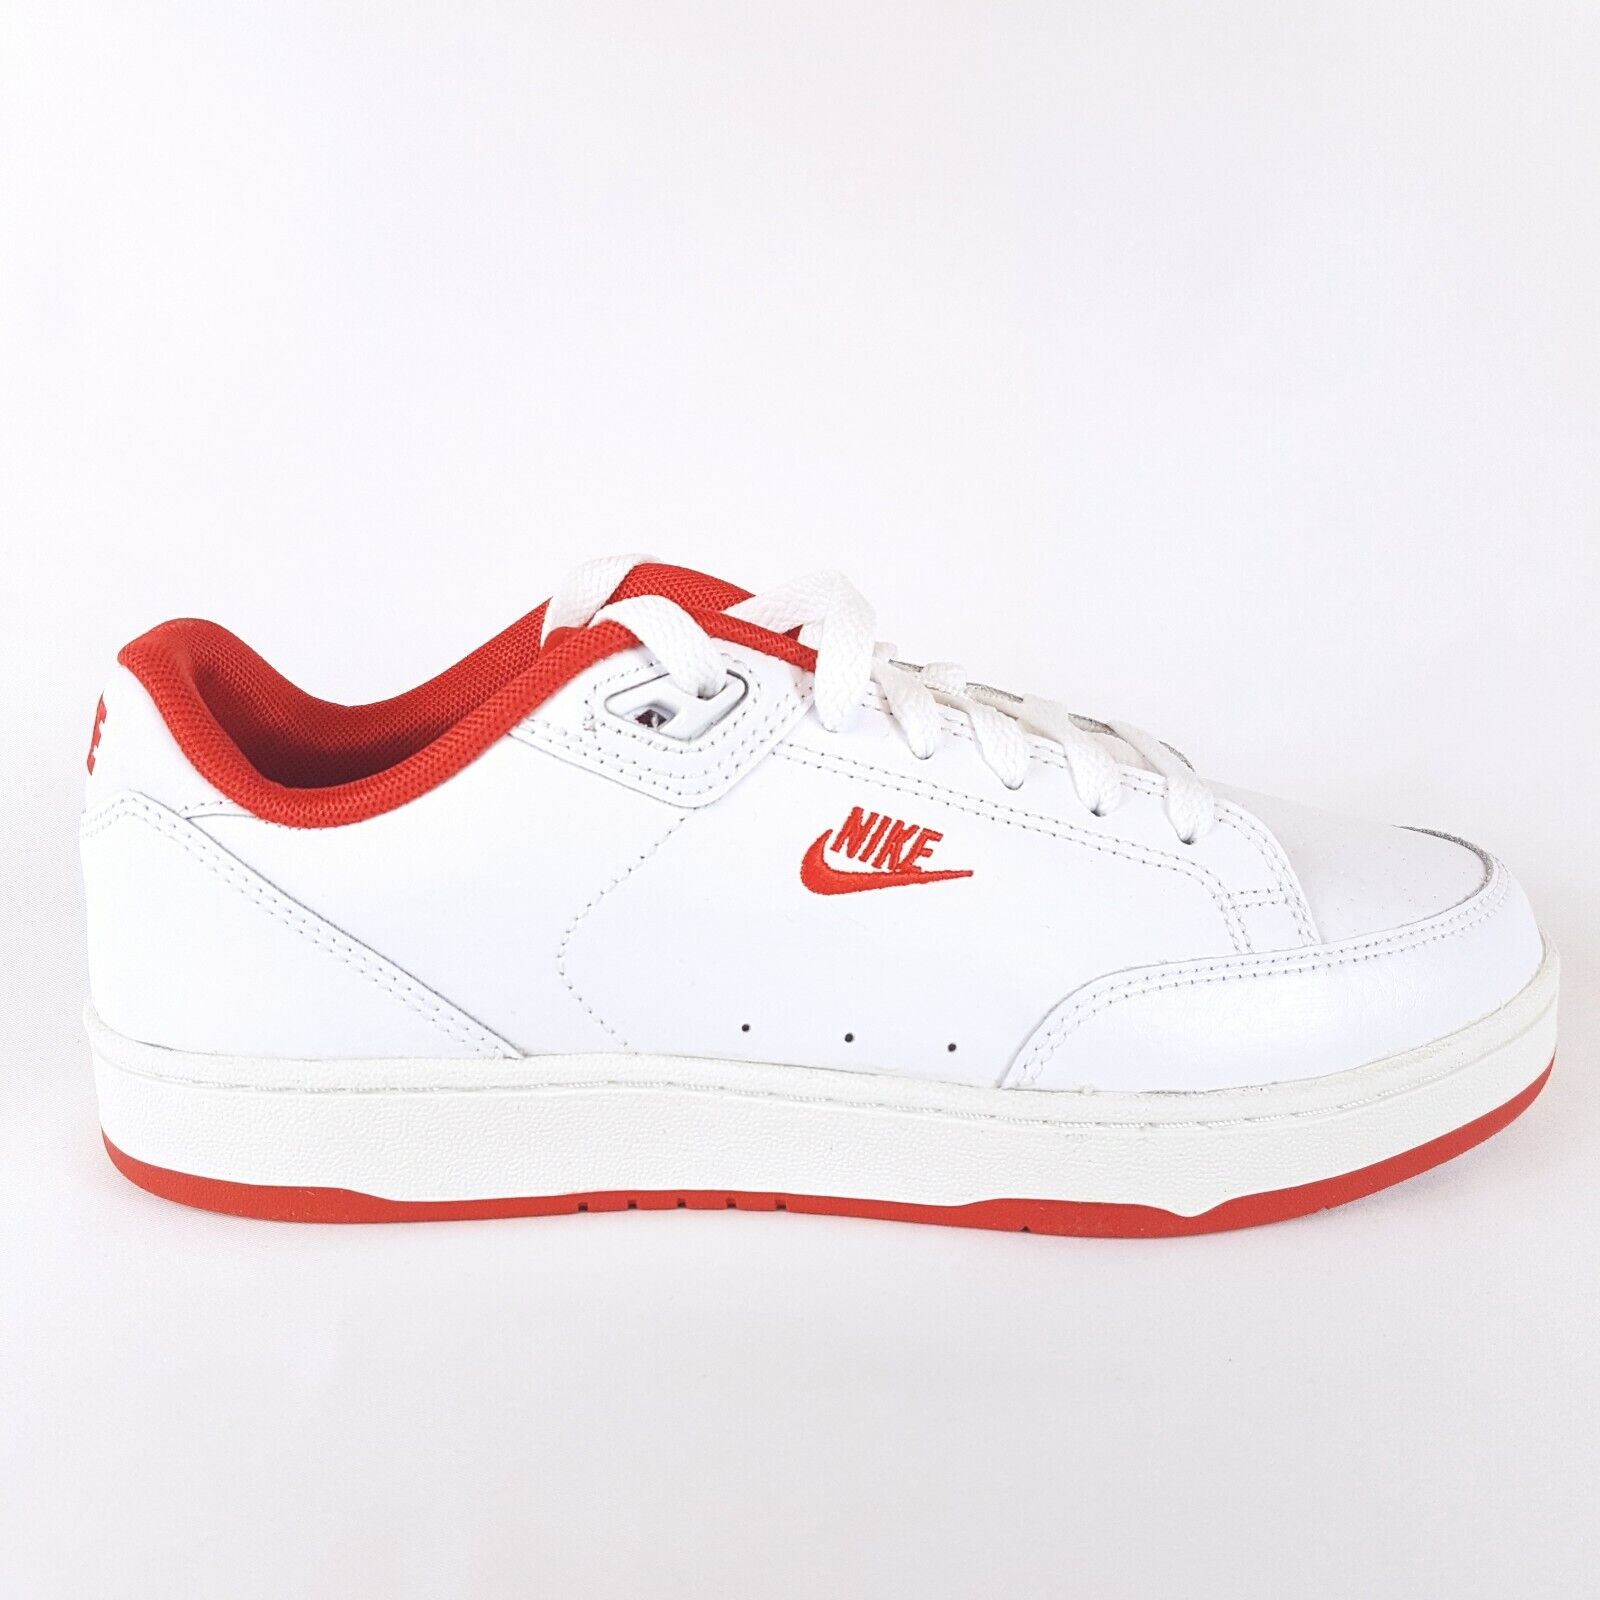 Grandstand II White/Red Trainers. Mens Size Brand New. *Fast & Free 888407326745 | eBay